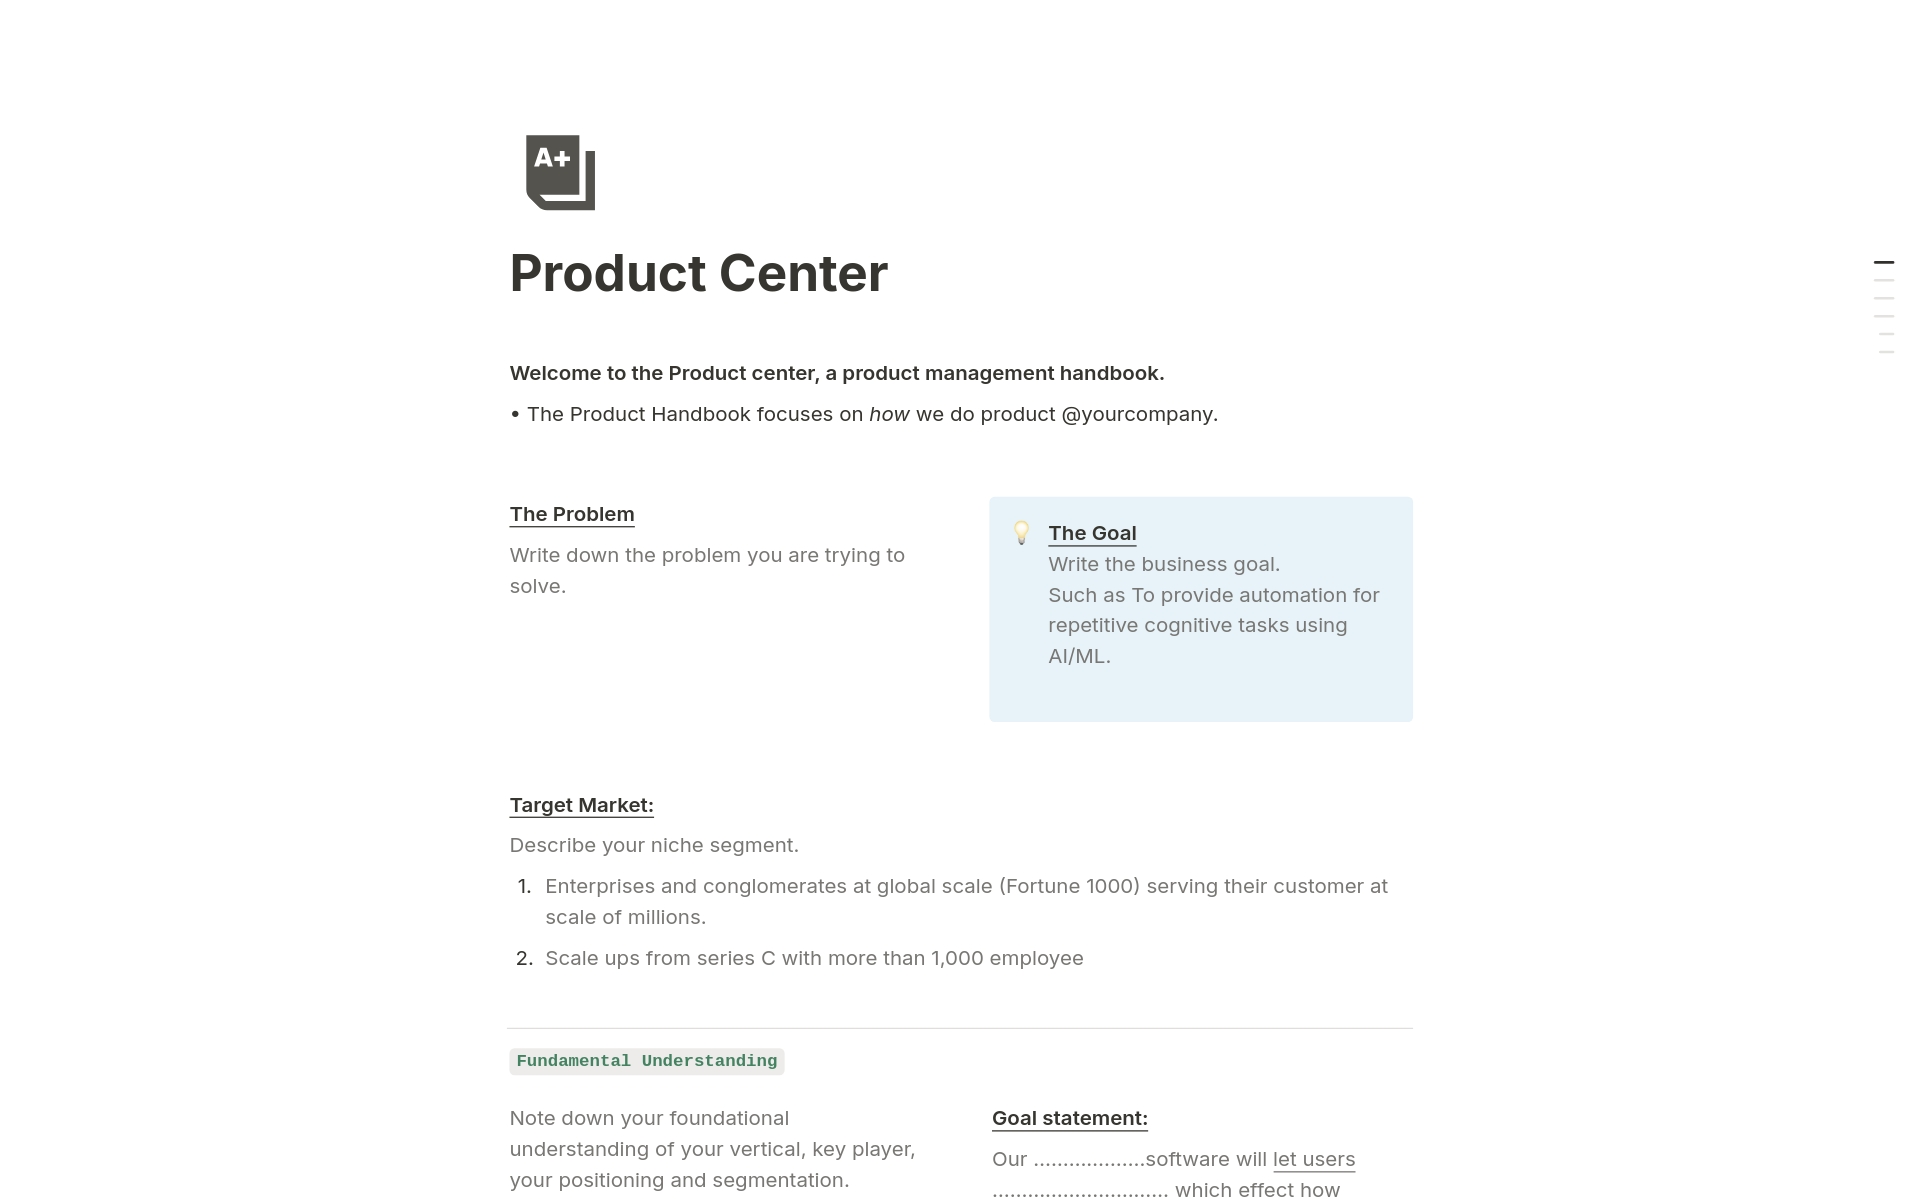 The Product Centre template on Notion helps product teams streamline their workflows by covering strategy, planning, operations, and systems for efficient development and management.